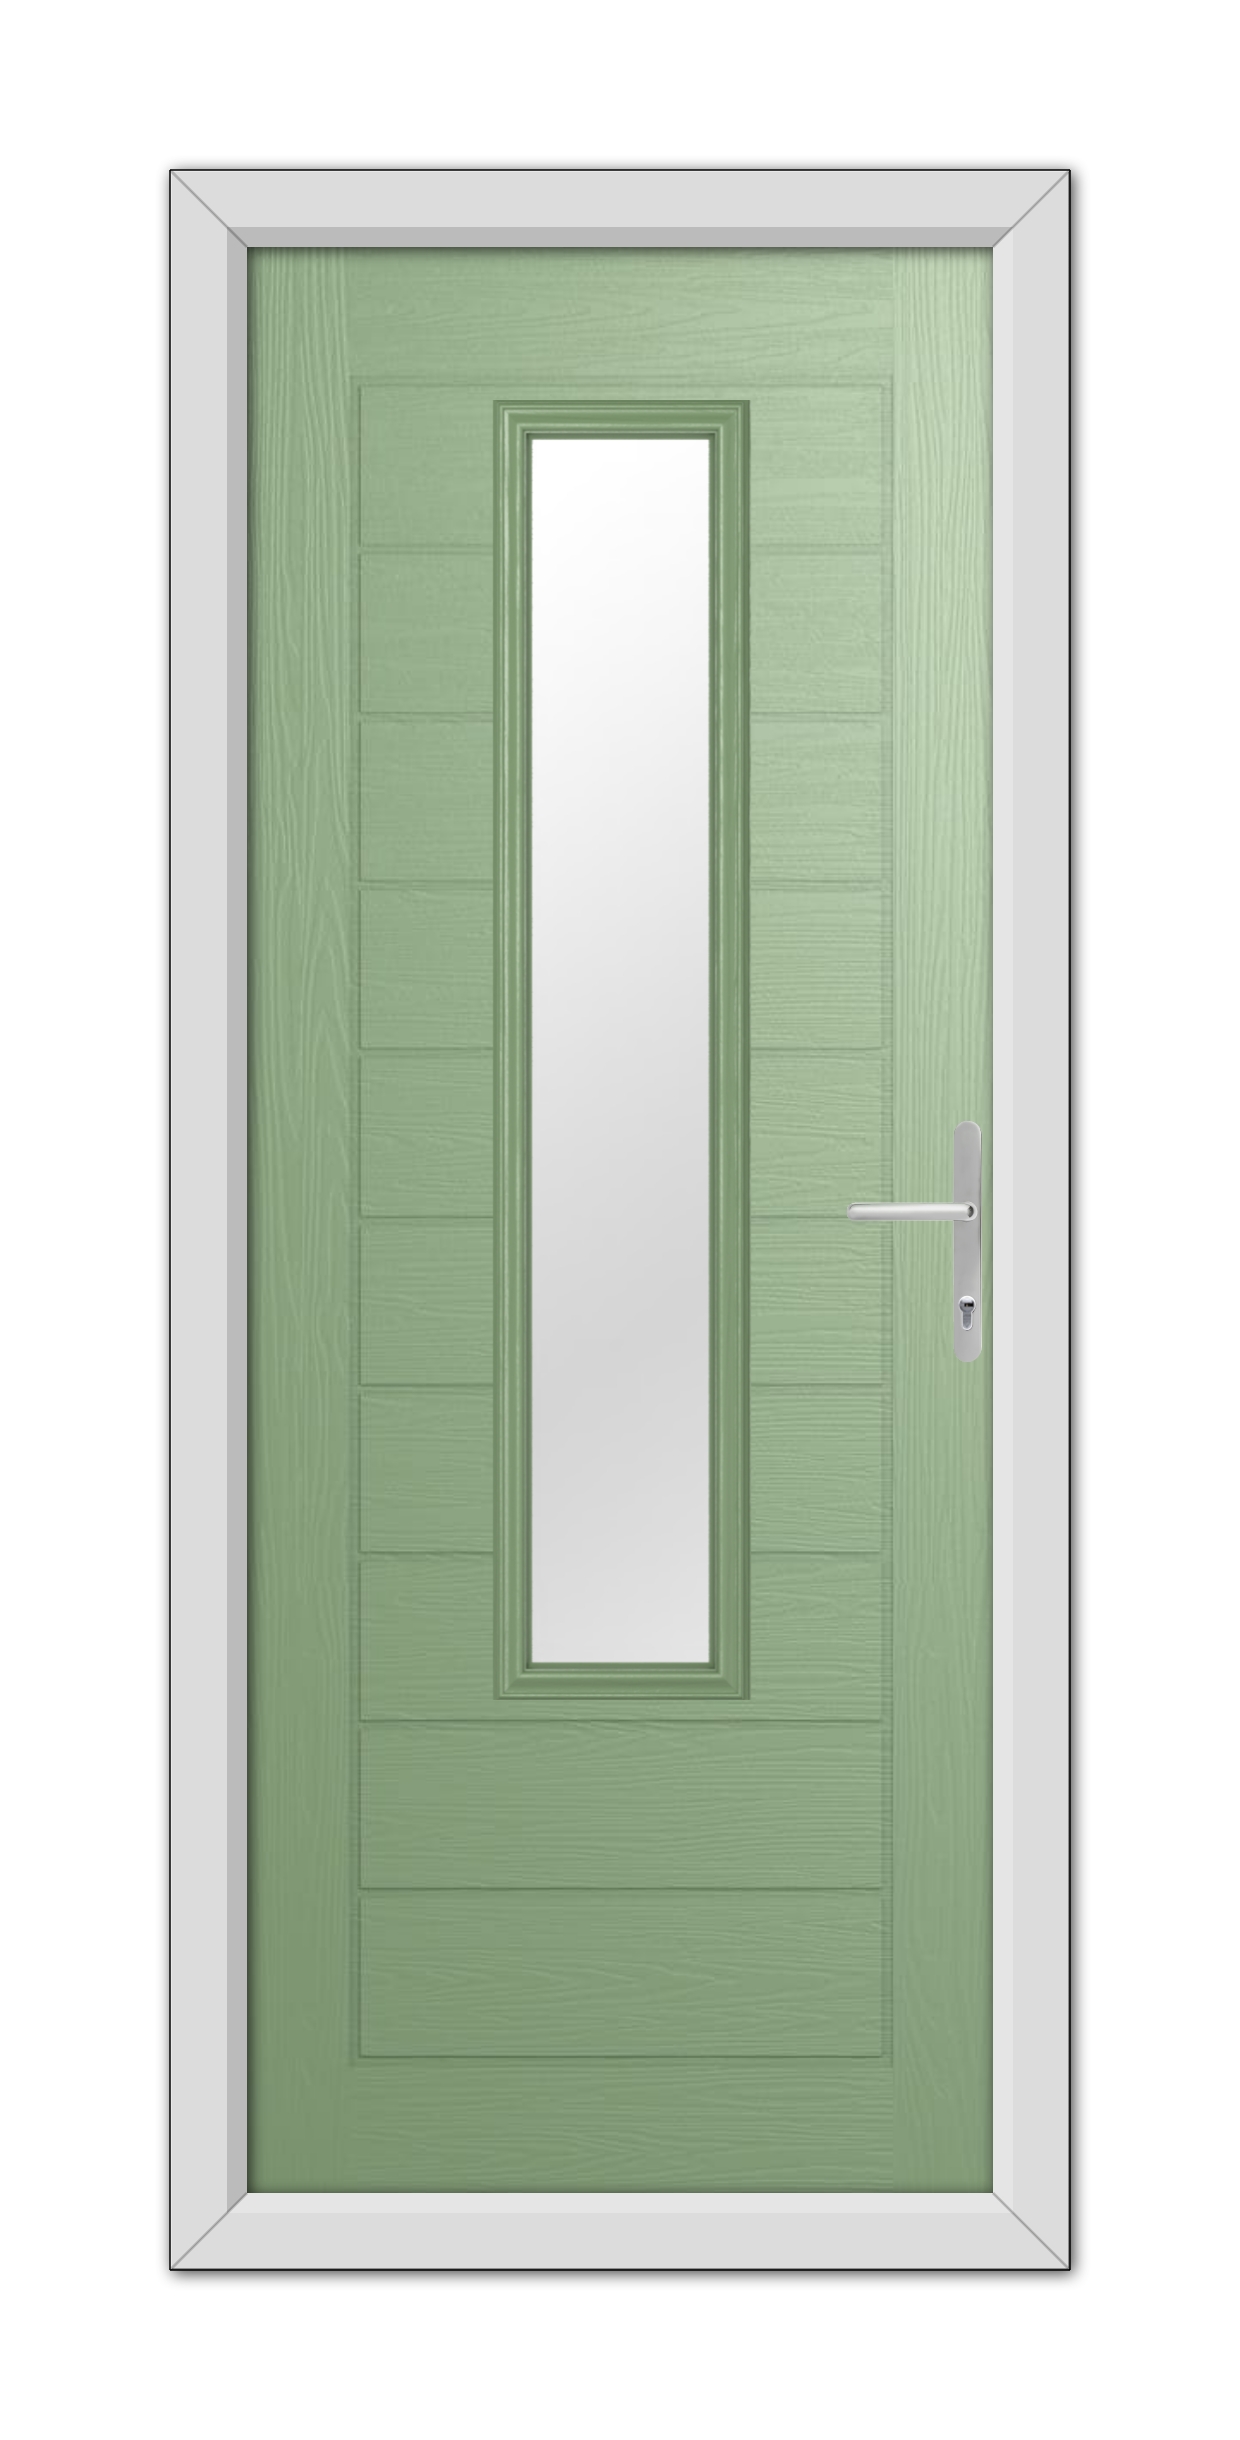 A Chartwell Green Bedford Composite Door 48mm Timber Core with a vertical rectangular glass panel and a white handle, set within a white frame.